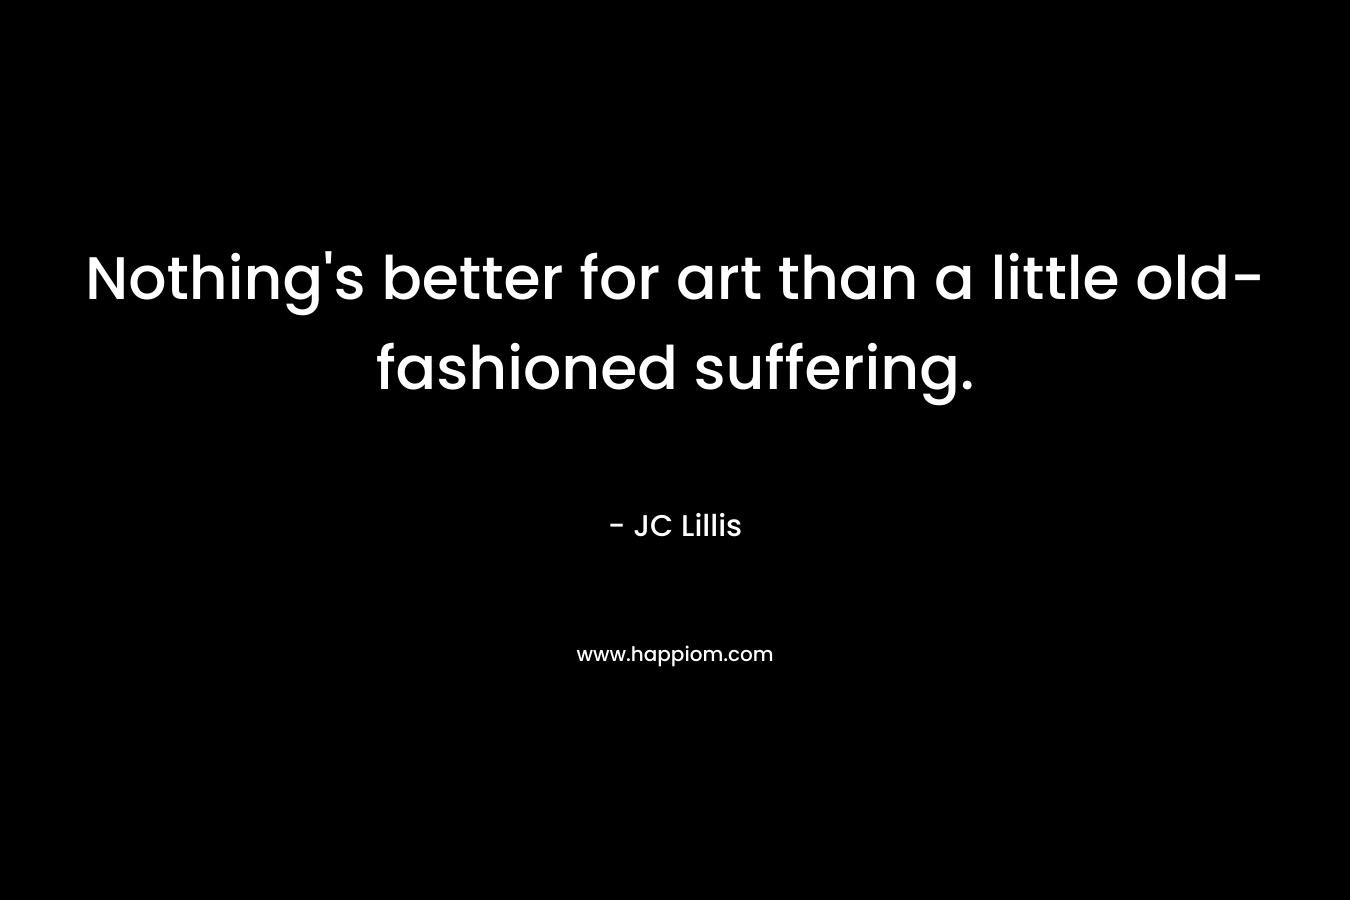 Nothing's better for art than a little old-fashioned suffering.